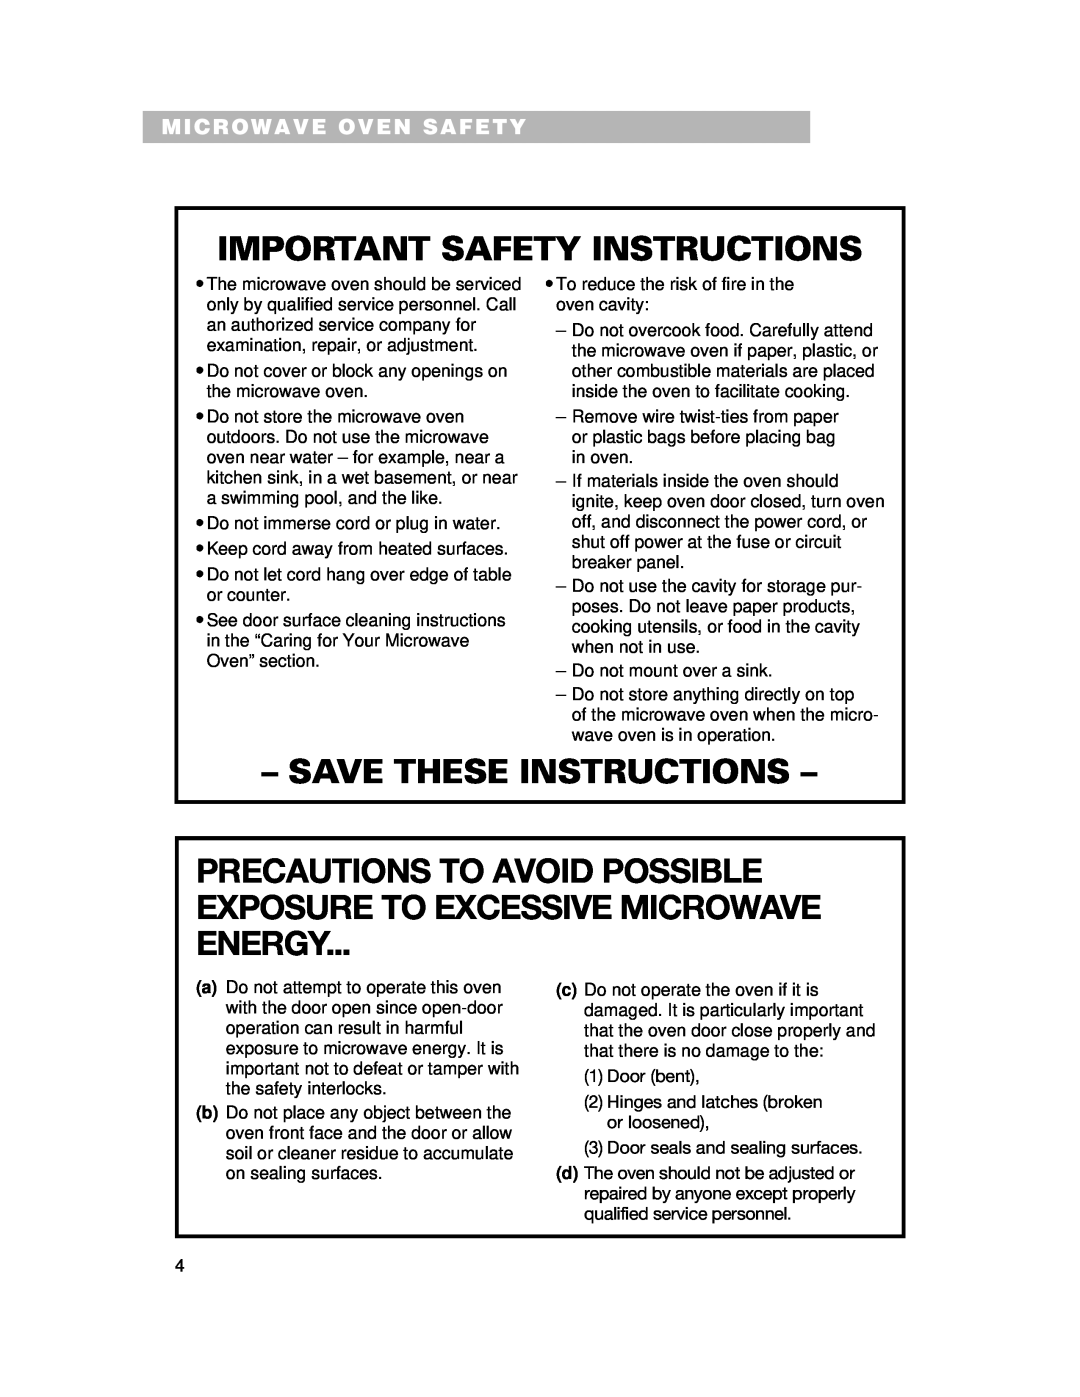 Whirlpool CMT061SG Precautions To Avoid Possible Exposure To Excessive Microwave Energy, Microwave Oven Safety 